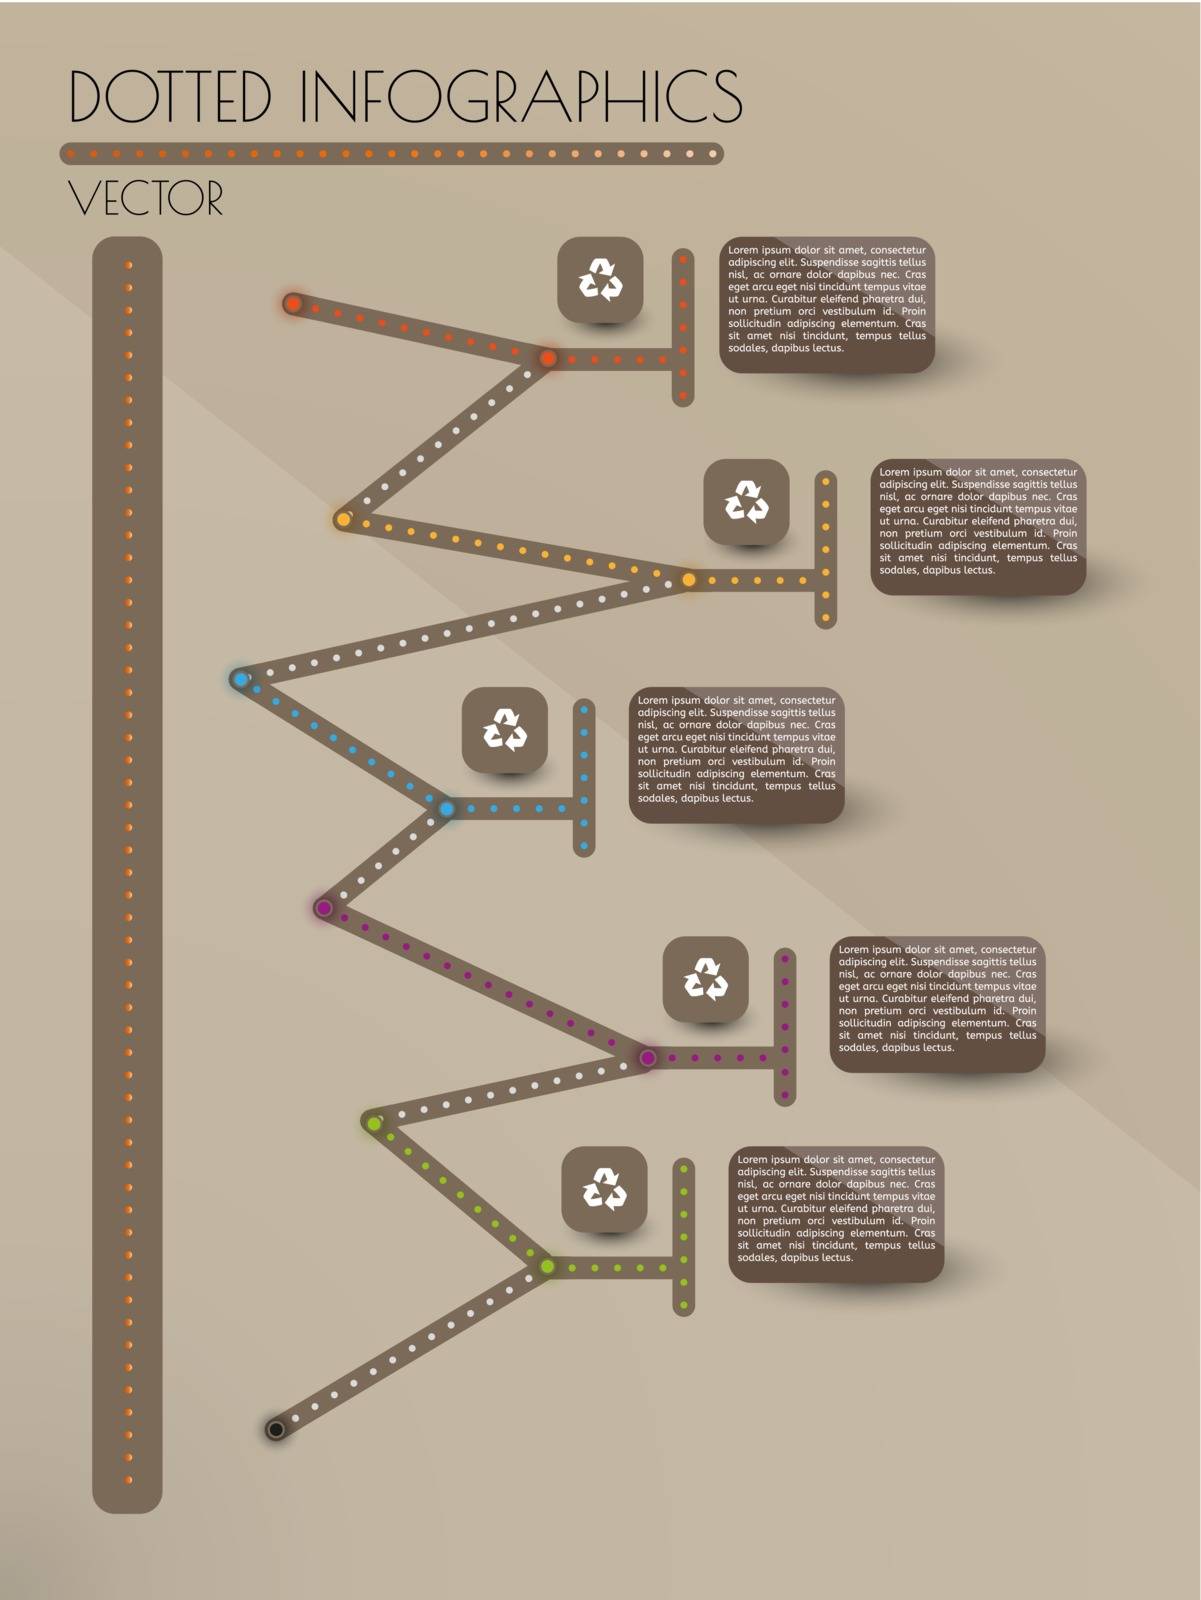 dark infographic vector with dotted lines on brown background